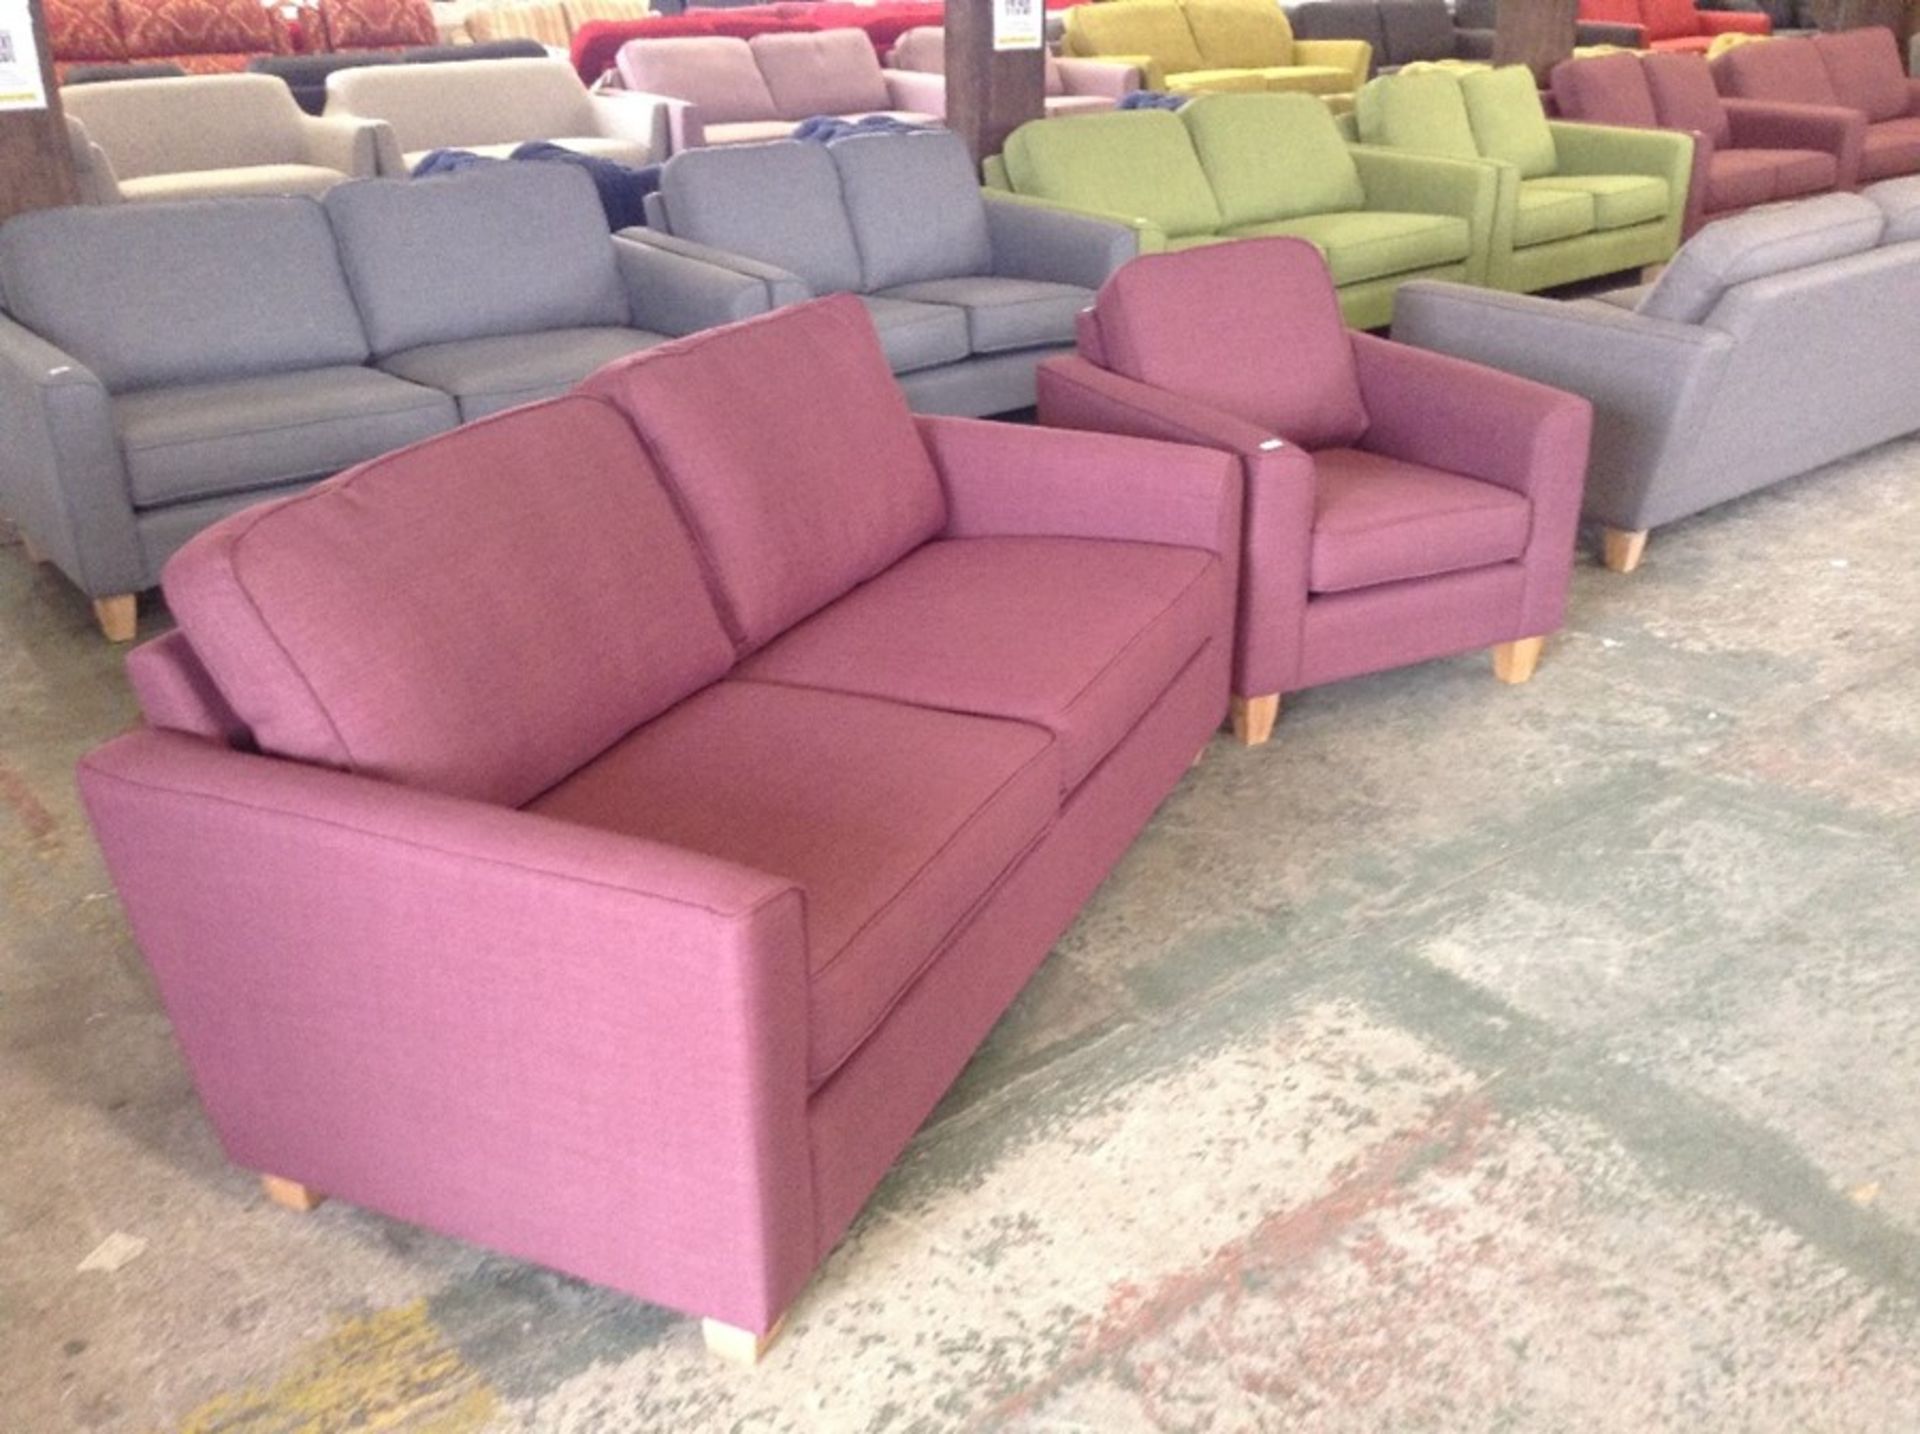 PORTIA Turin Mulberry Medium Sofabed and Chair ( S